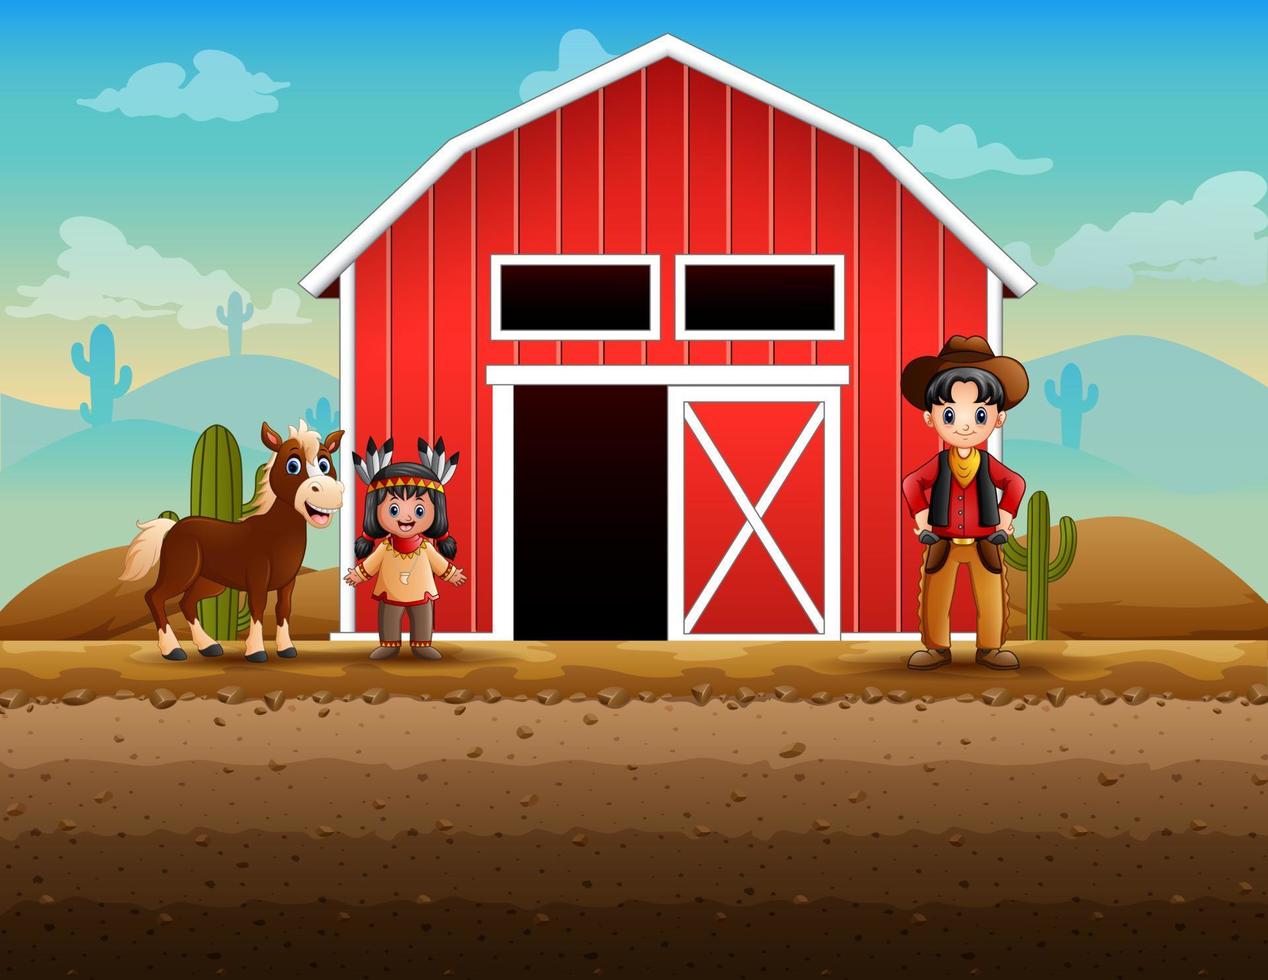 Illustration of a cowboy and native indian girl at the farm vector